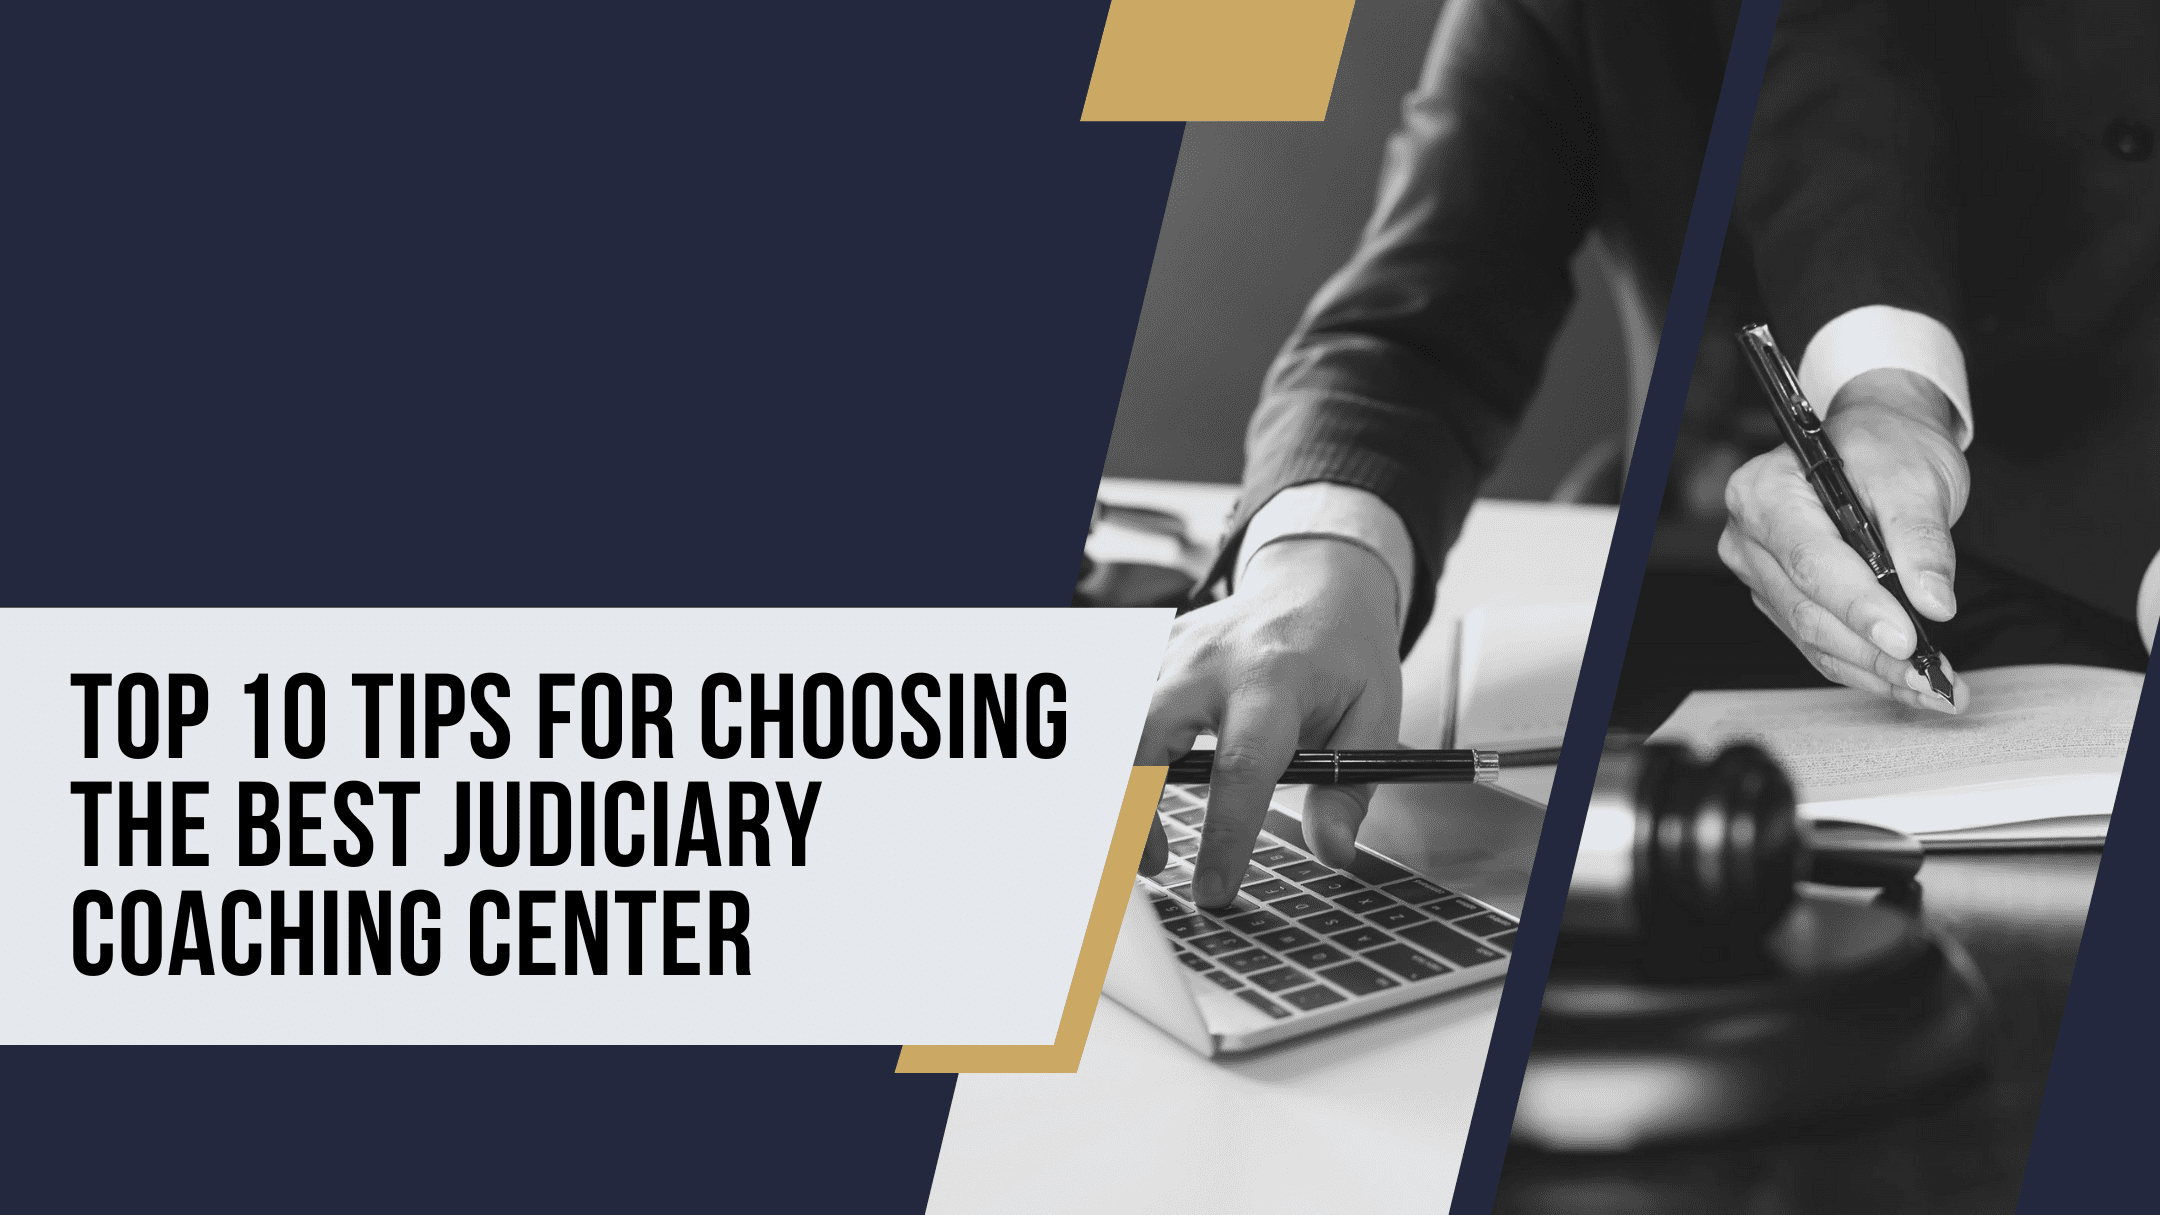 Top 10 Tips for Choosing the Best Judiciary Coaching Center